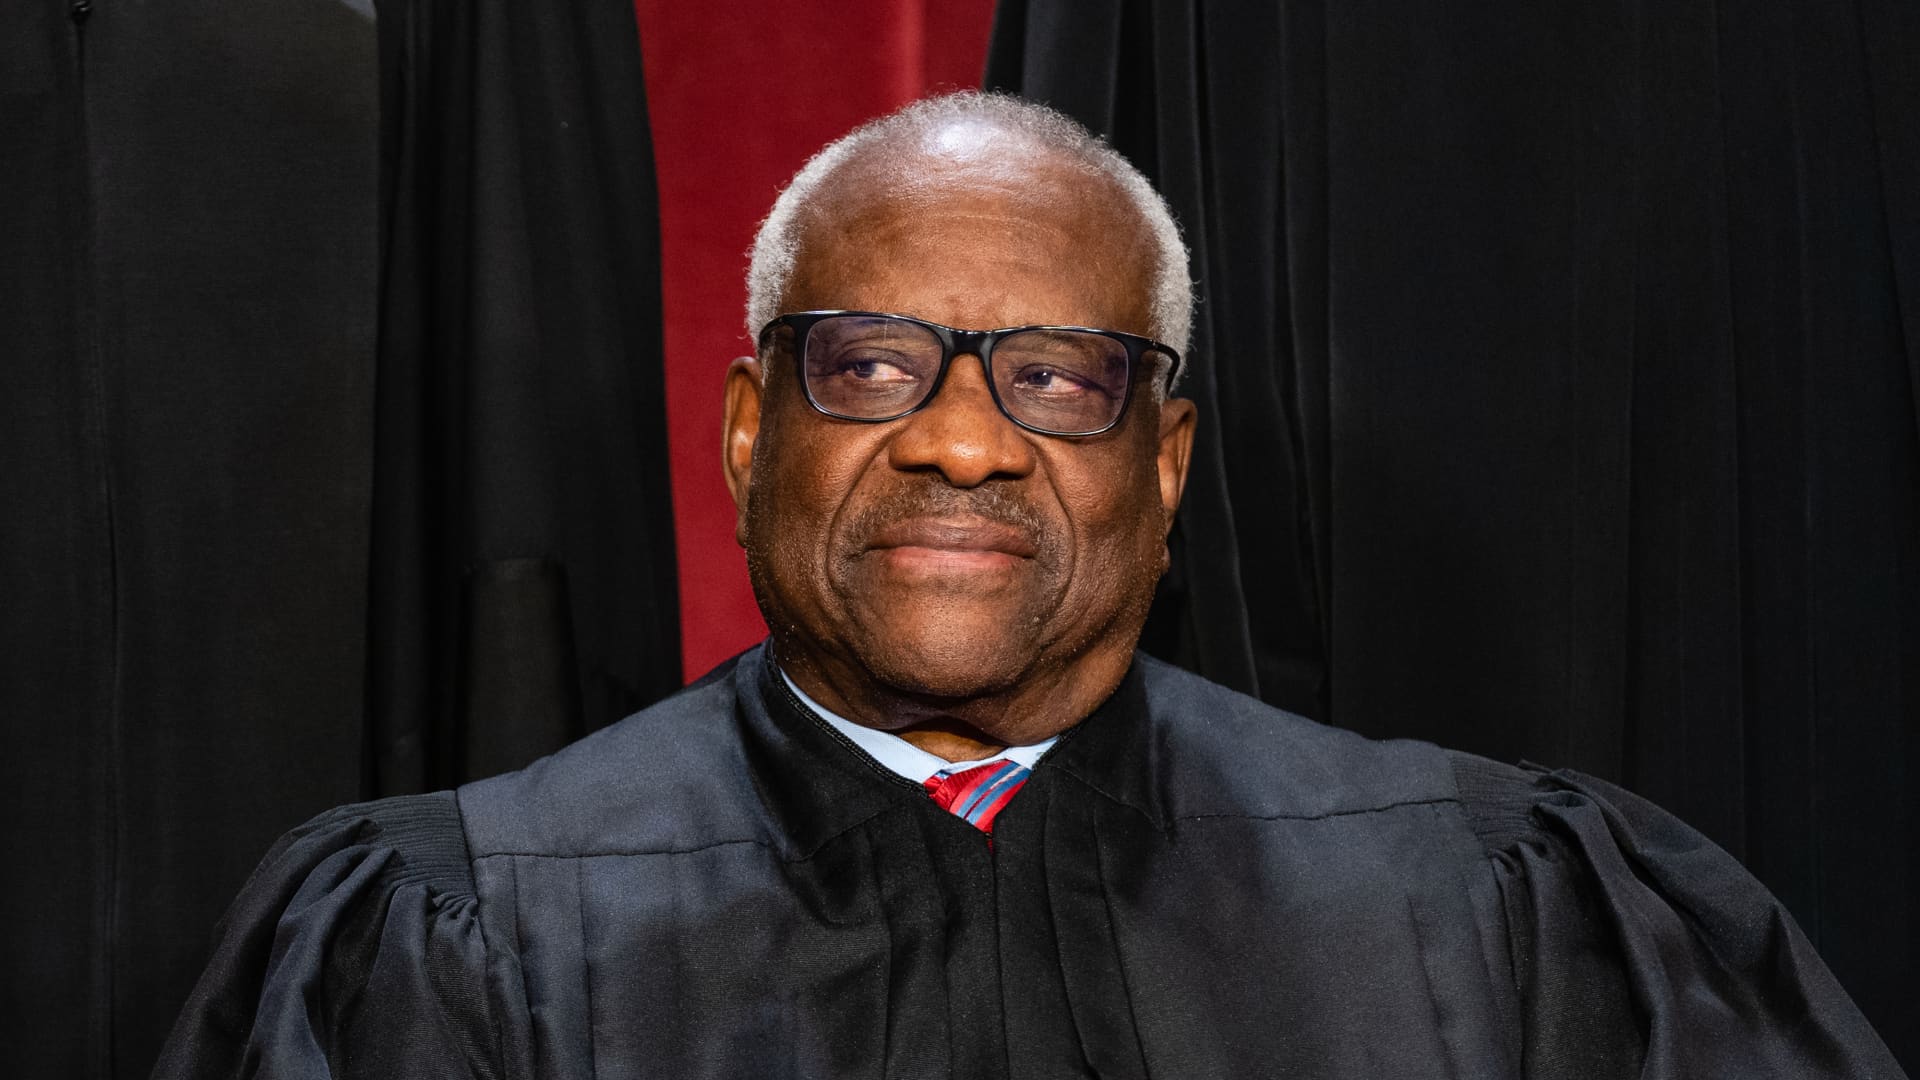 Clarence Thomas has accepted undisclosed luxury trips from GOP megadonor for decades, report says